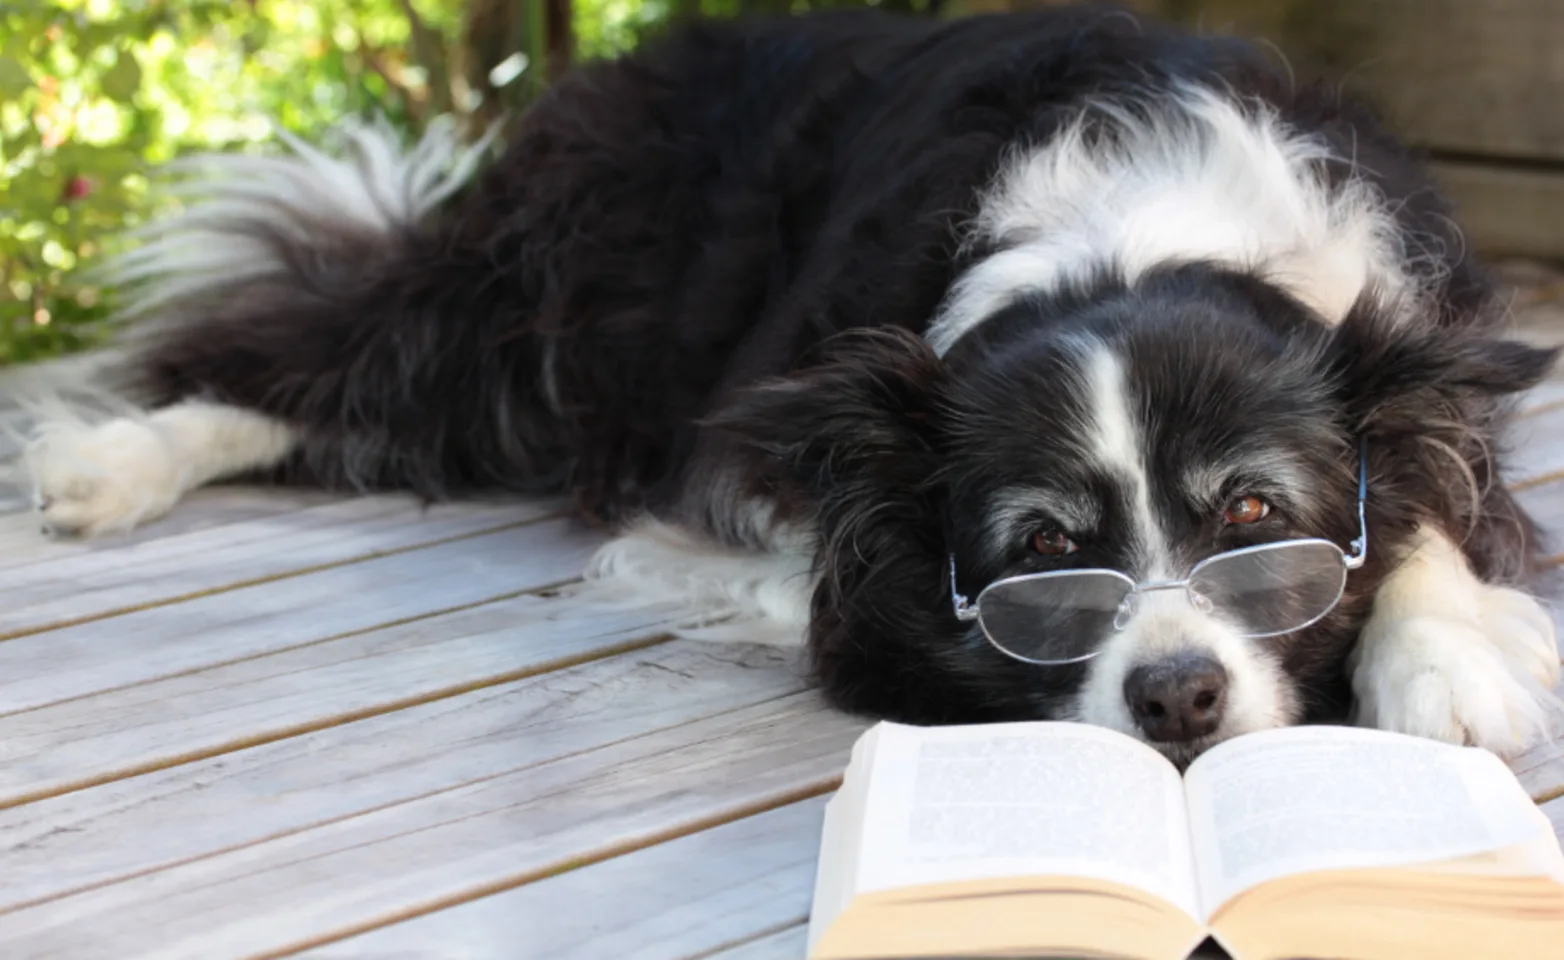 Black and white dog laying down reading with glasses on